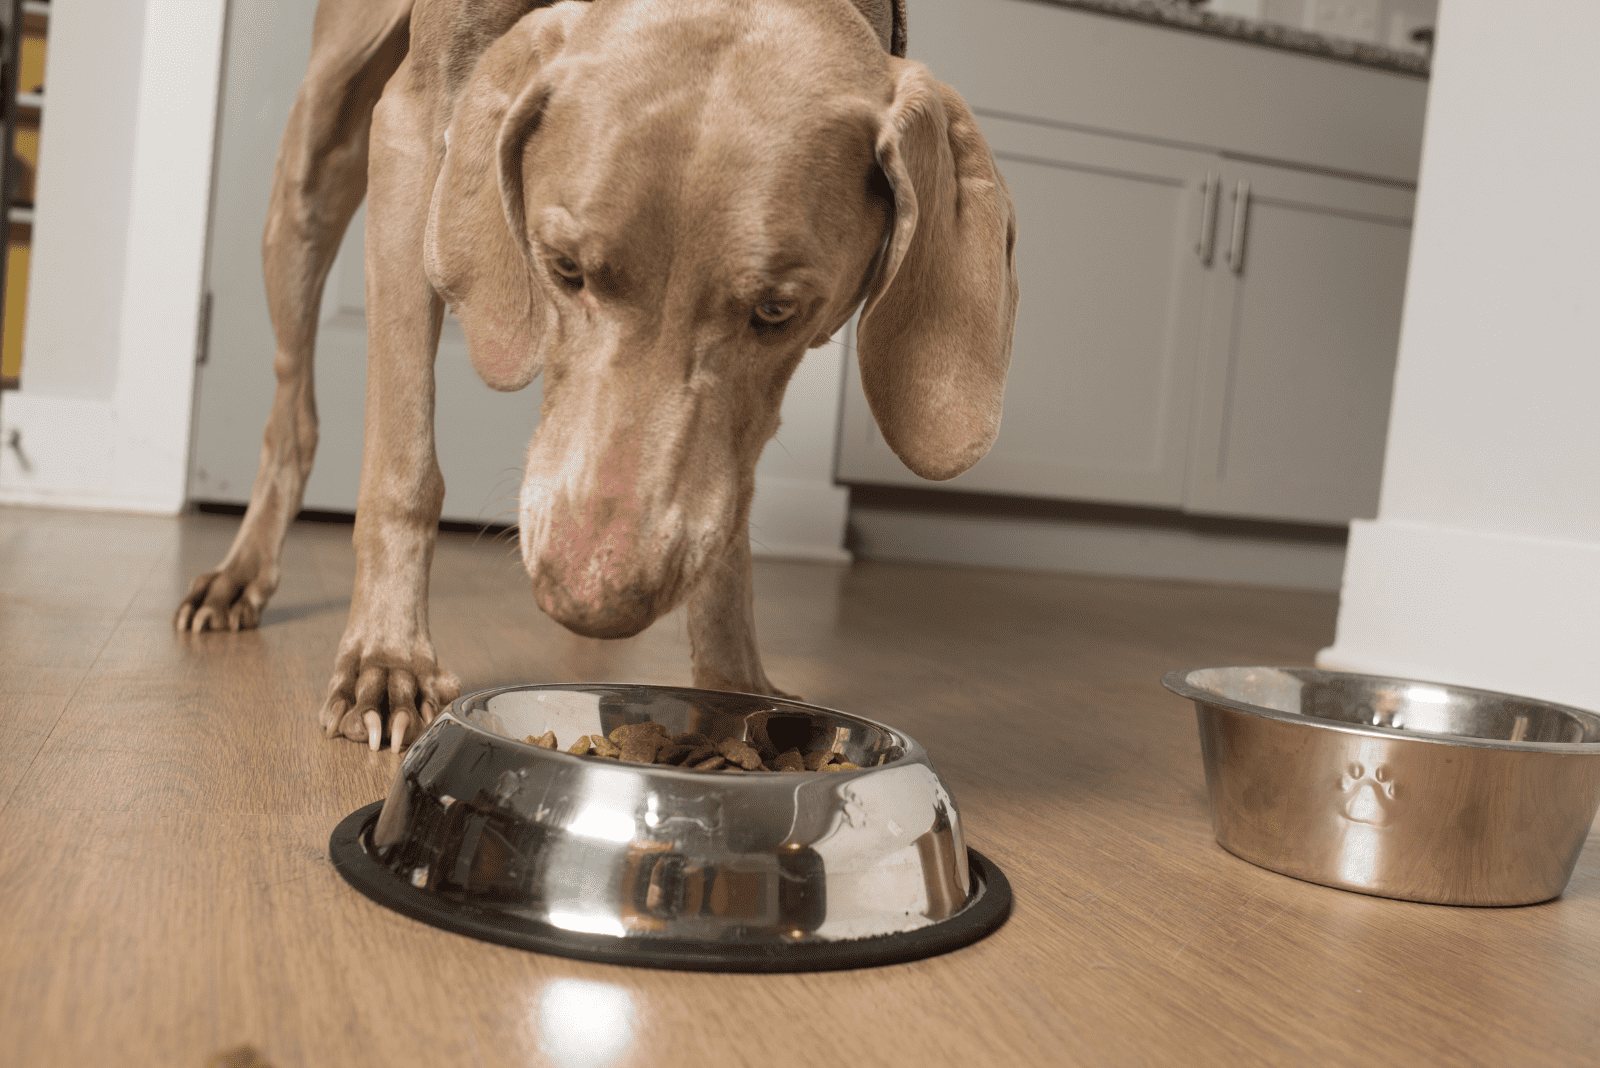 A Weimaraner stands in front of a bowl of food